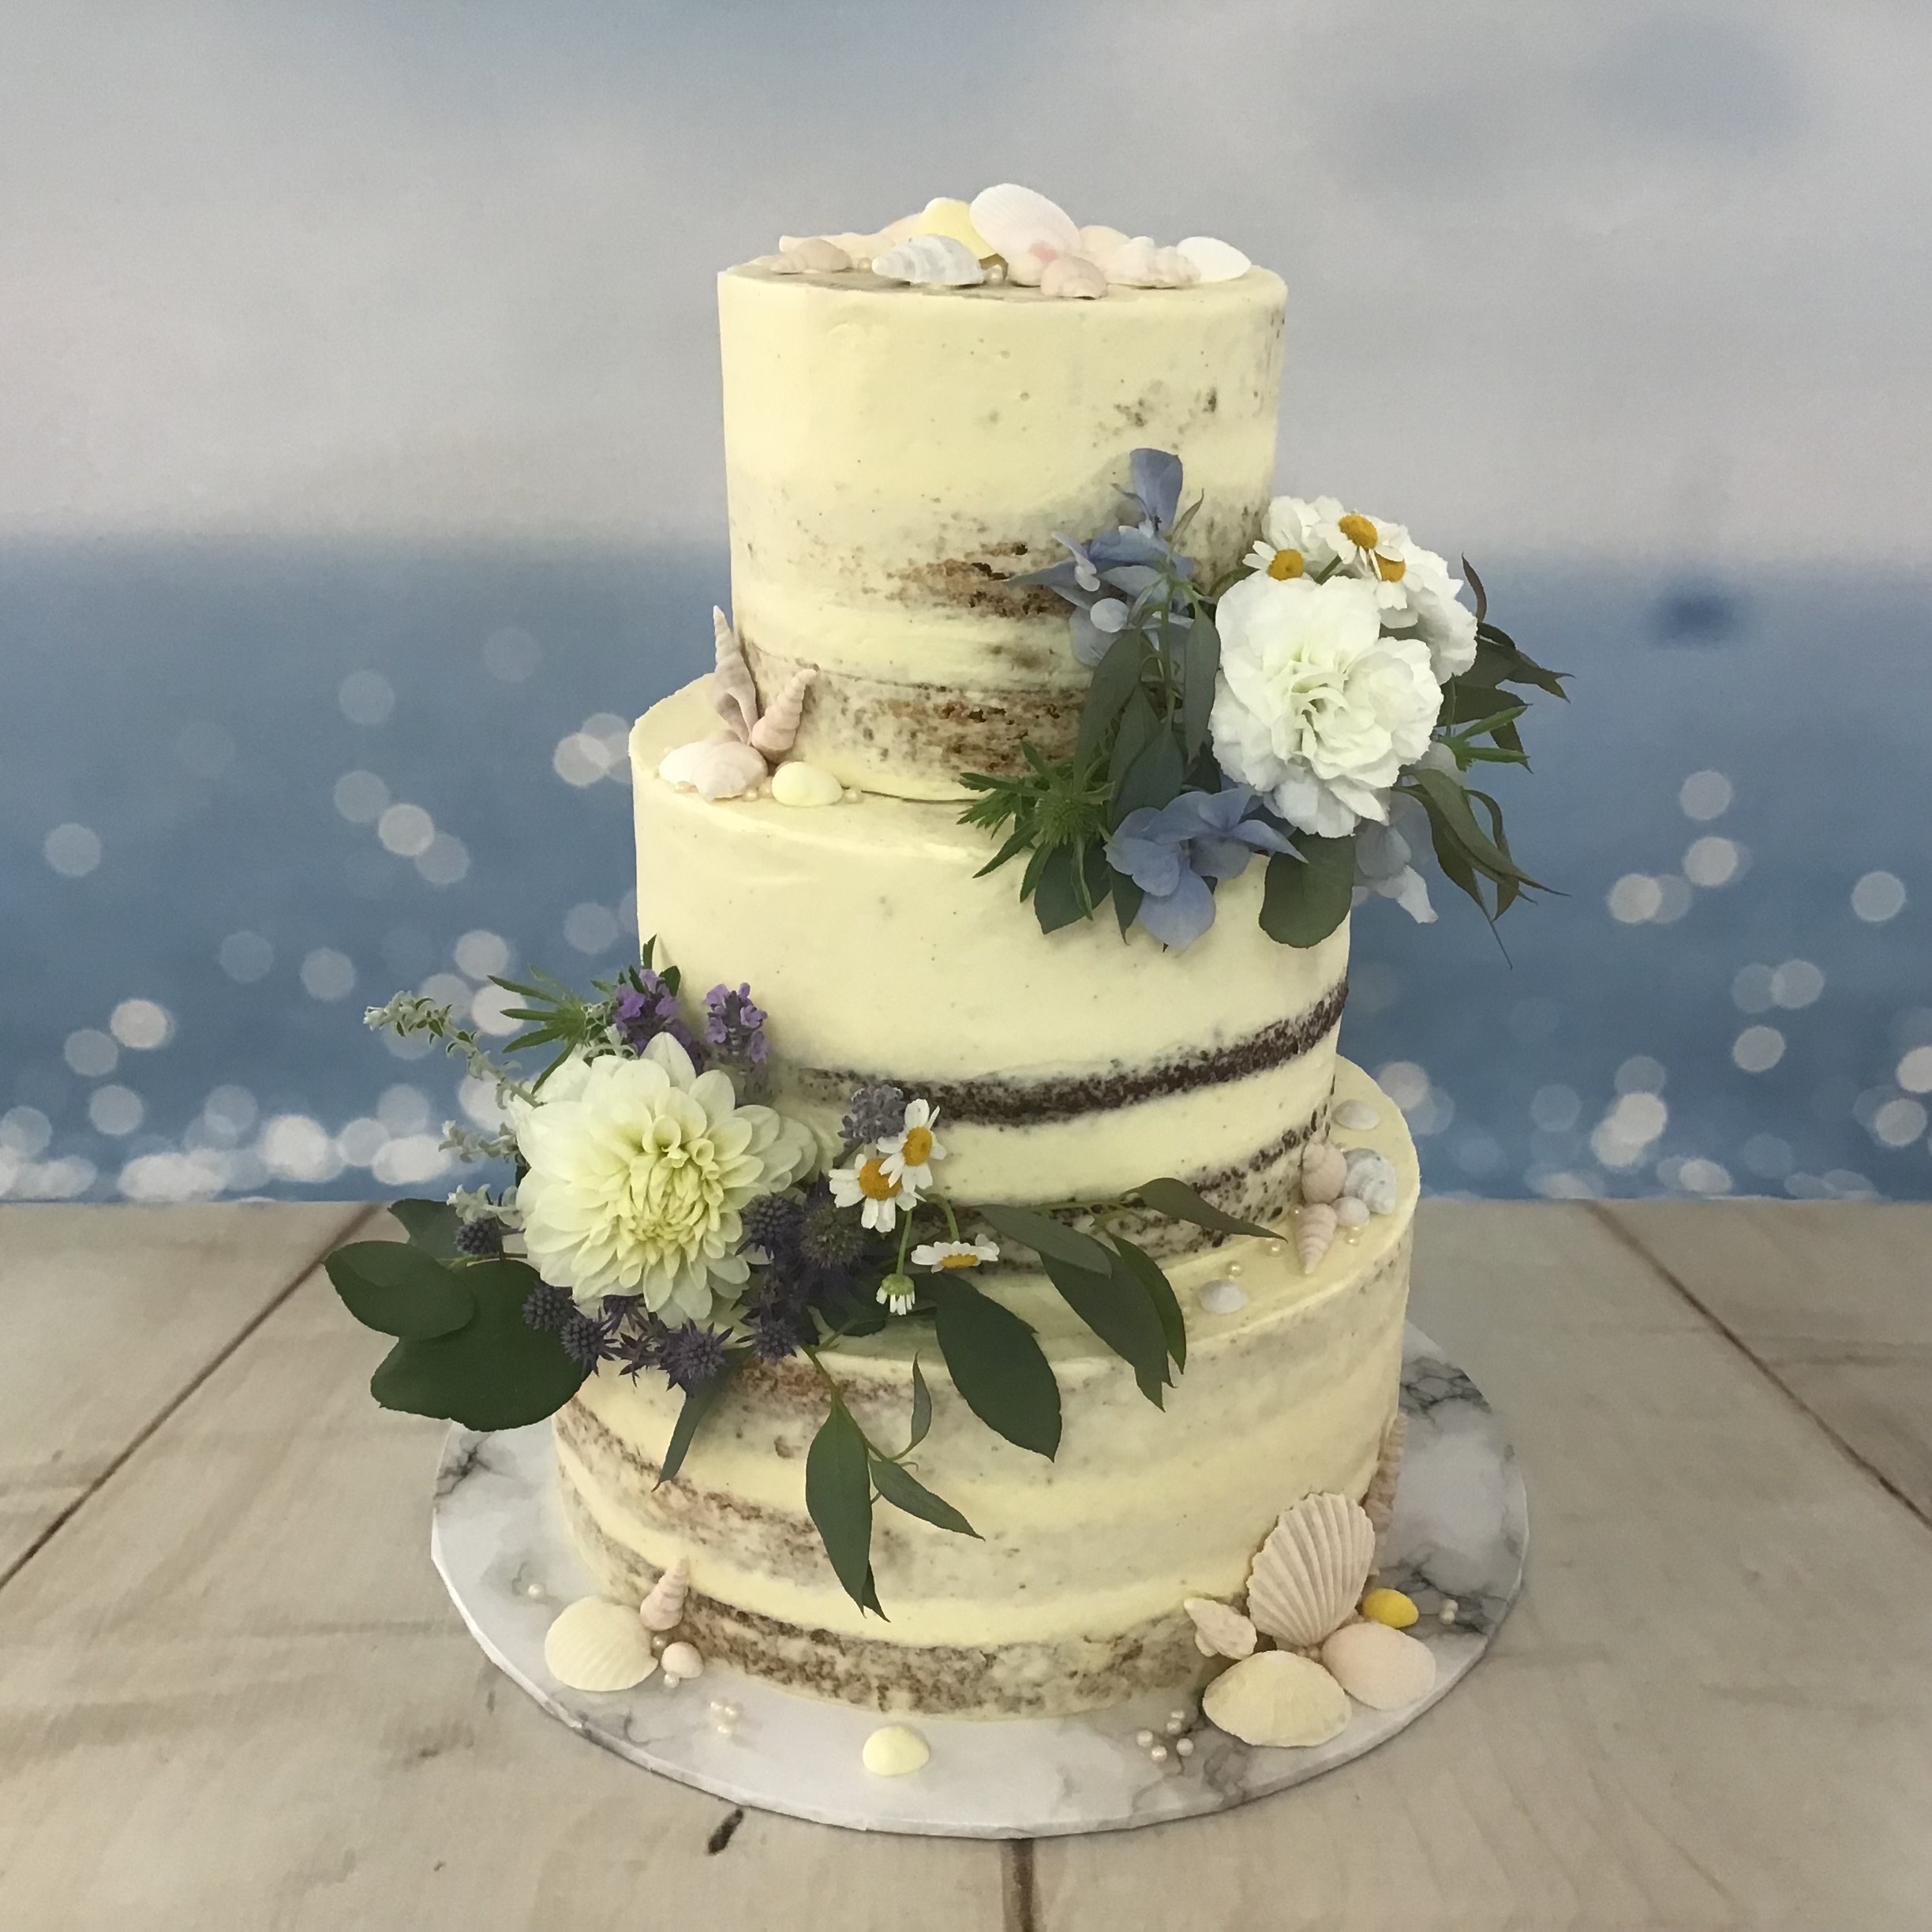 Wedding Cakes Pictures | Download Free Images on Unsplash